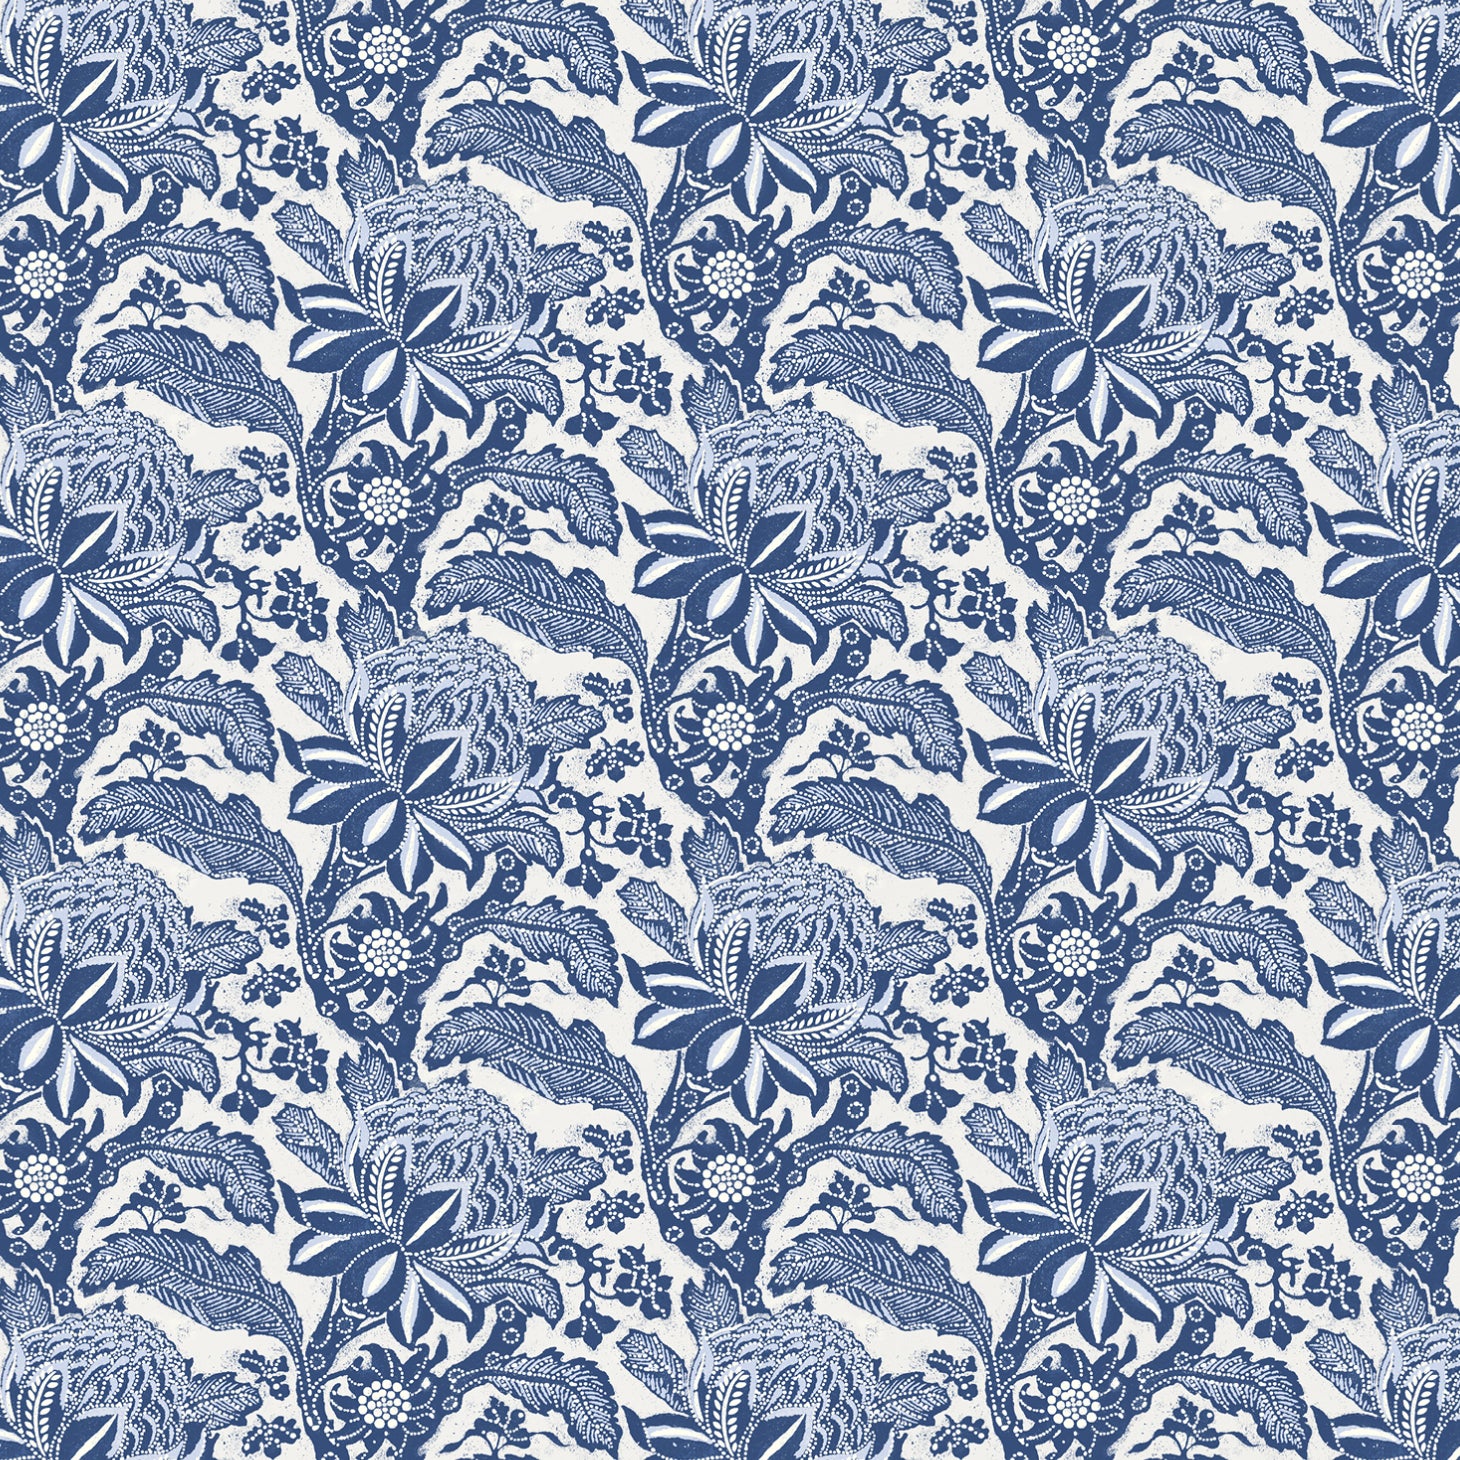 Detail of wallpaper in a repeating botanical print in navy on a white field.